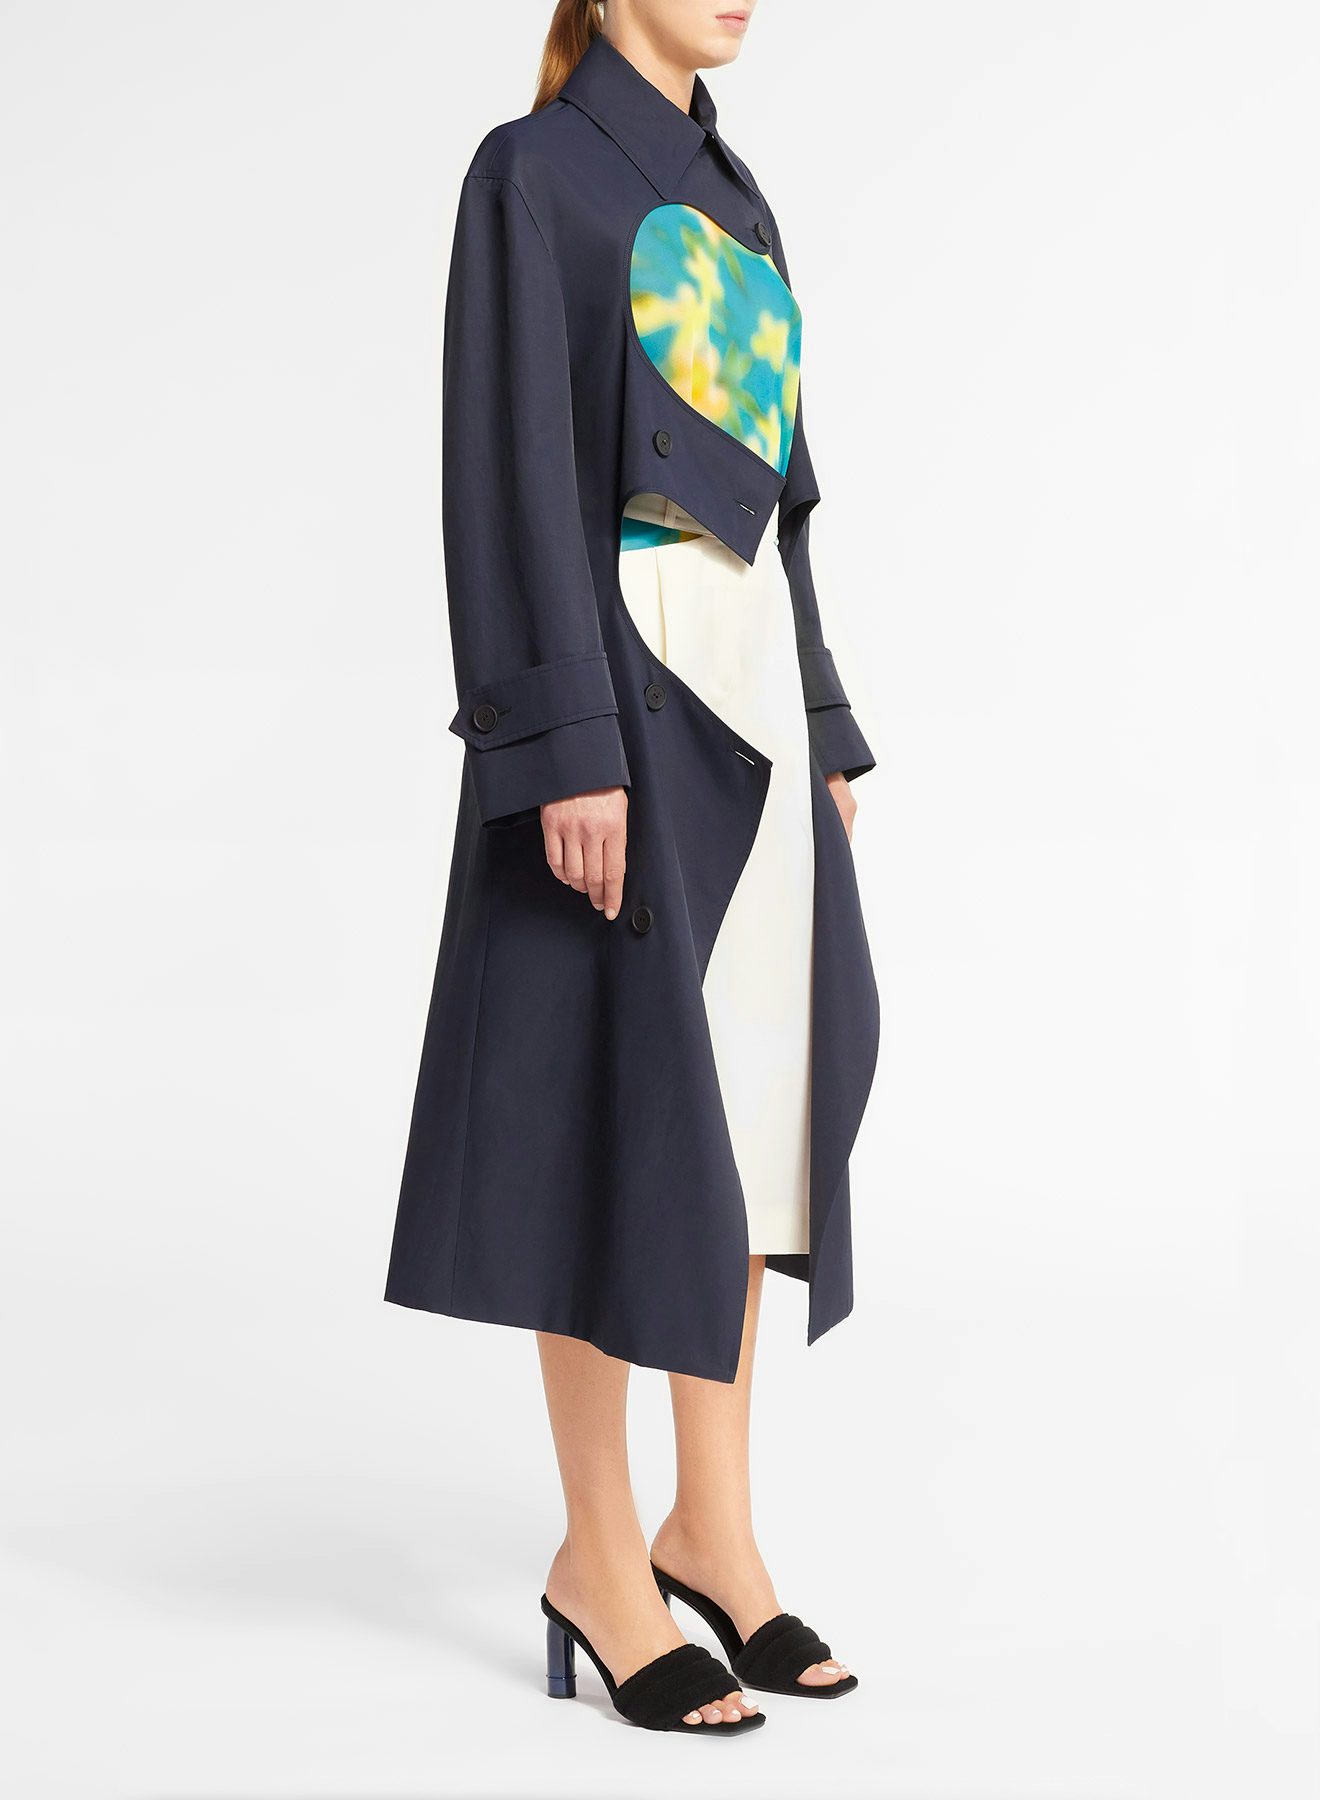 Dark Navy Technical Cotton Trench Coat With Openings on the Front - Nina Ricci